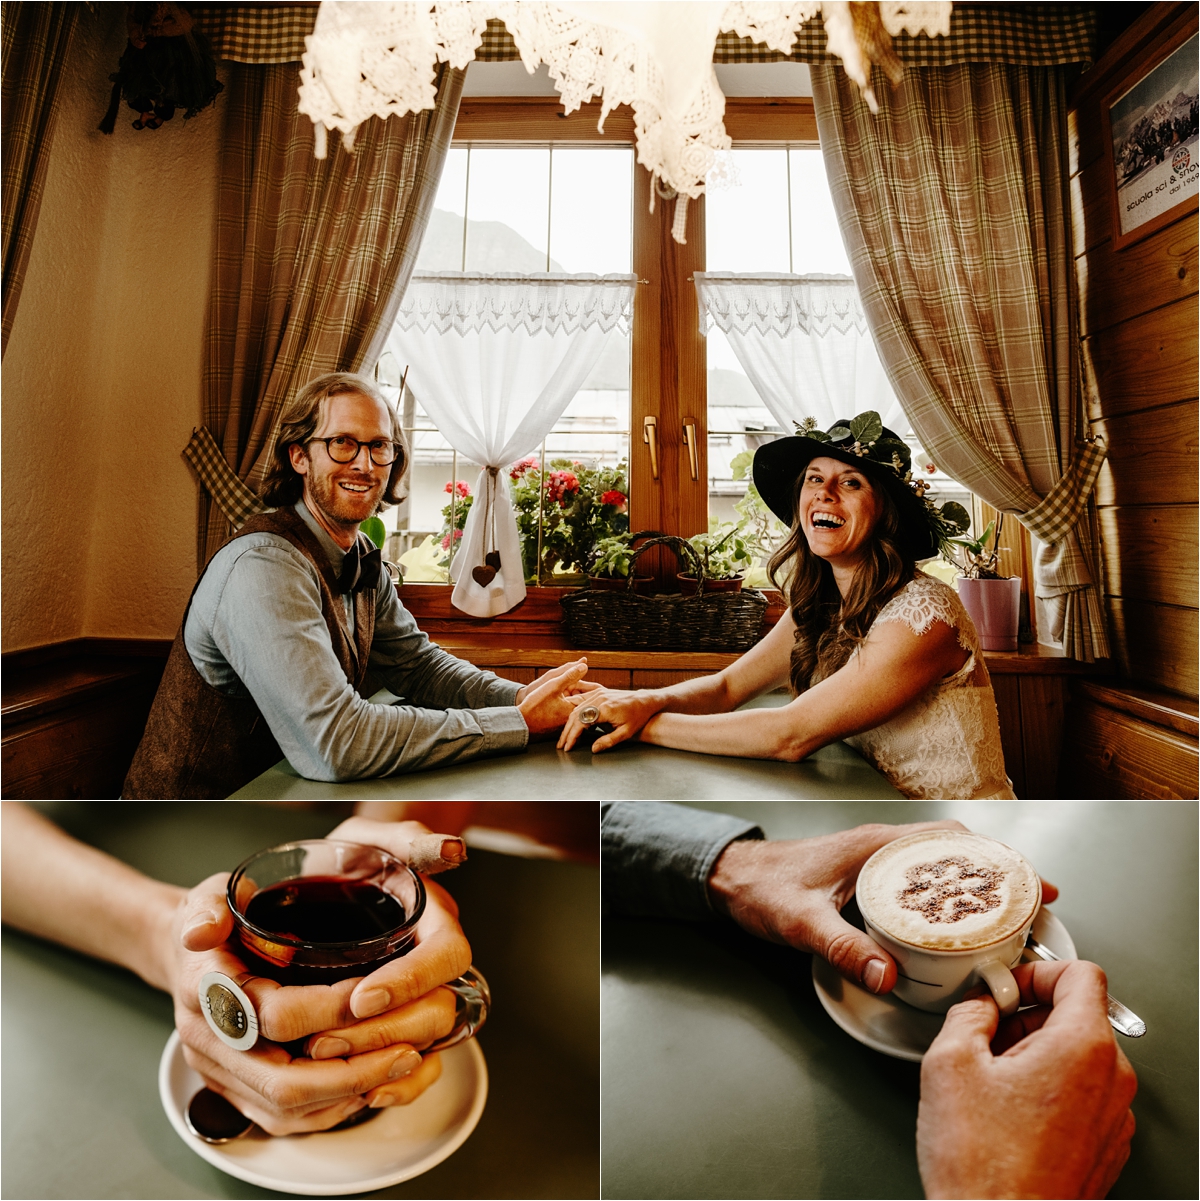 The bride and groom stop at a cafe for a mulled wine to warm up on the day of their Dolomites hiking elopement. Photography by Wild Connections Photography